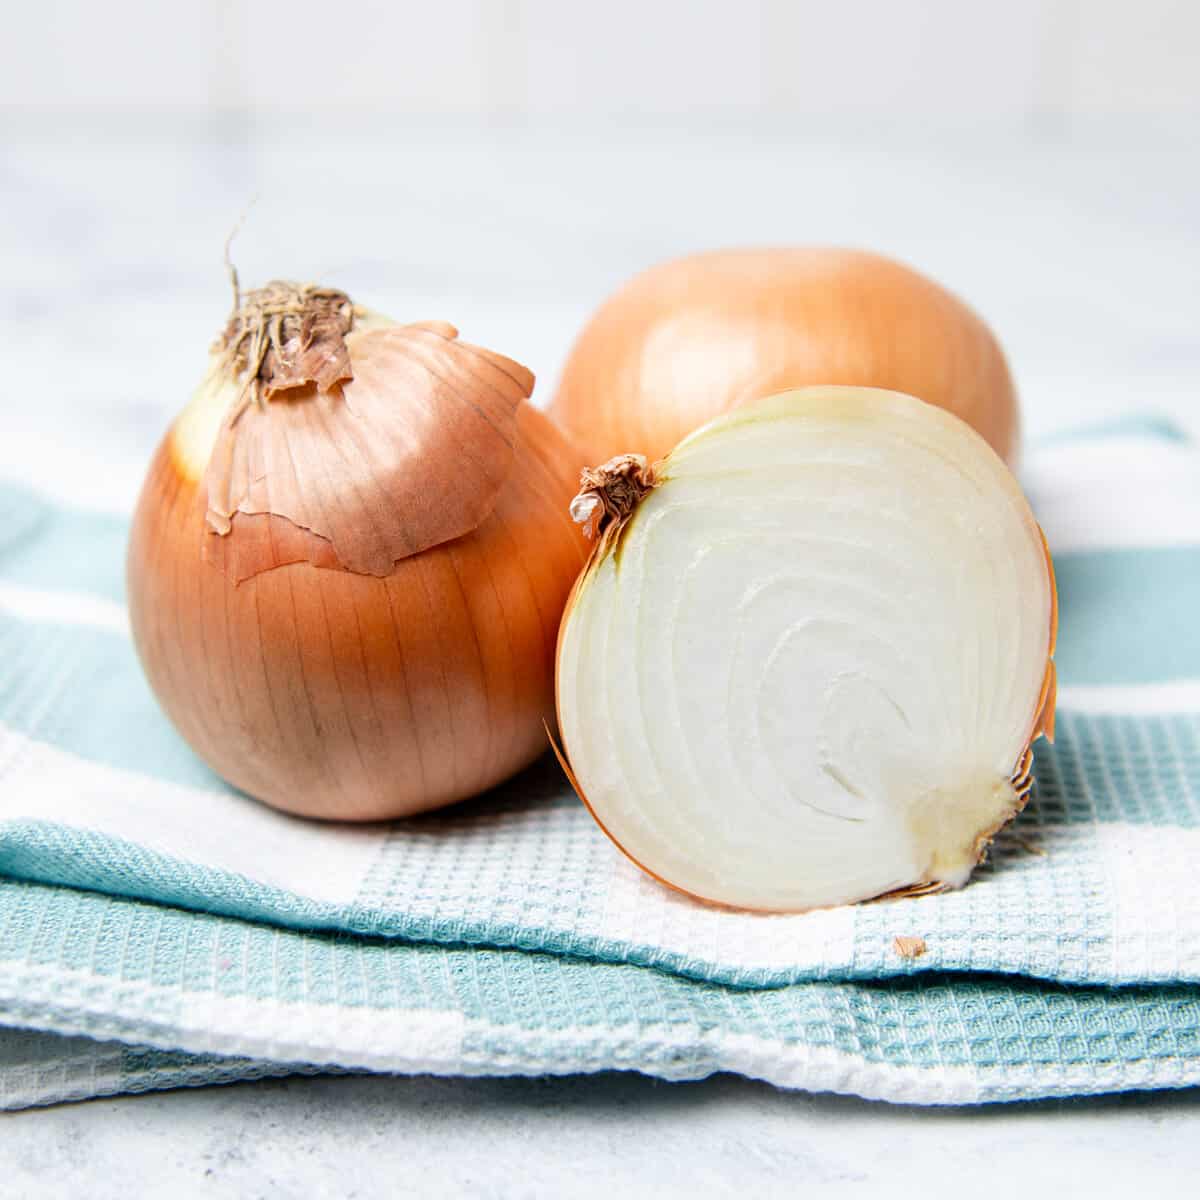 Sliced onion on a blue and white towel.